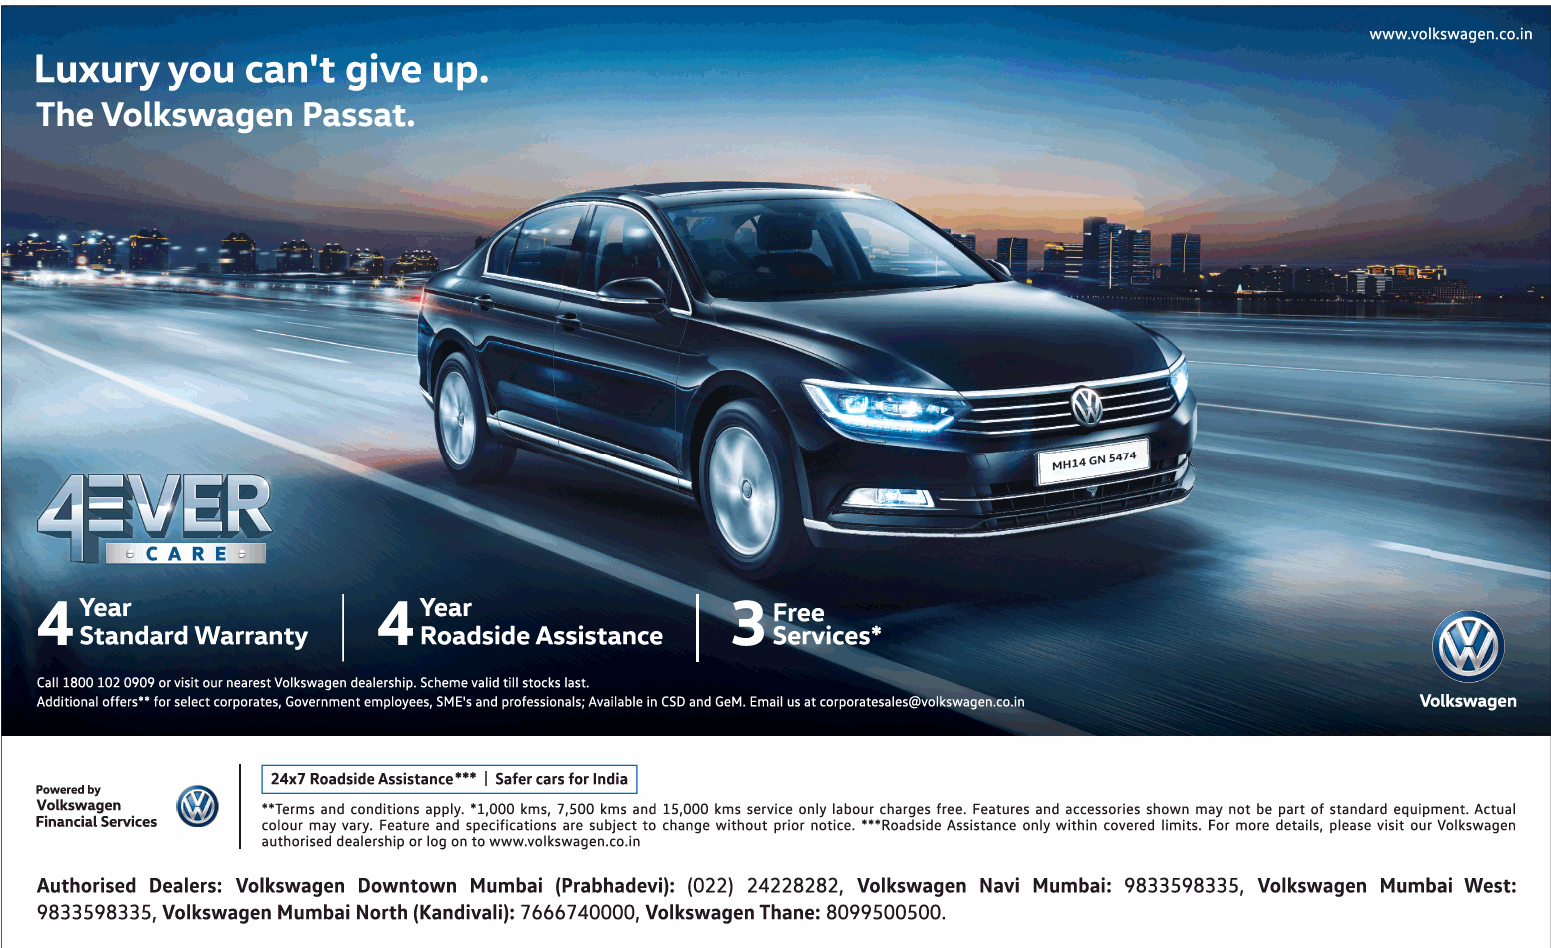 volkswagen-4-ever-care-4-year-standard-warranty-3-free-services-4-year-roadside-assistance-ad-bombay-times-01-02-2019.png